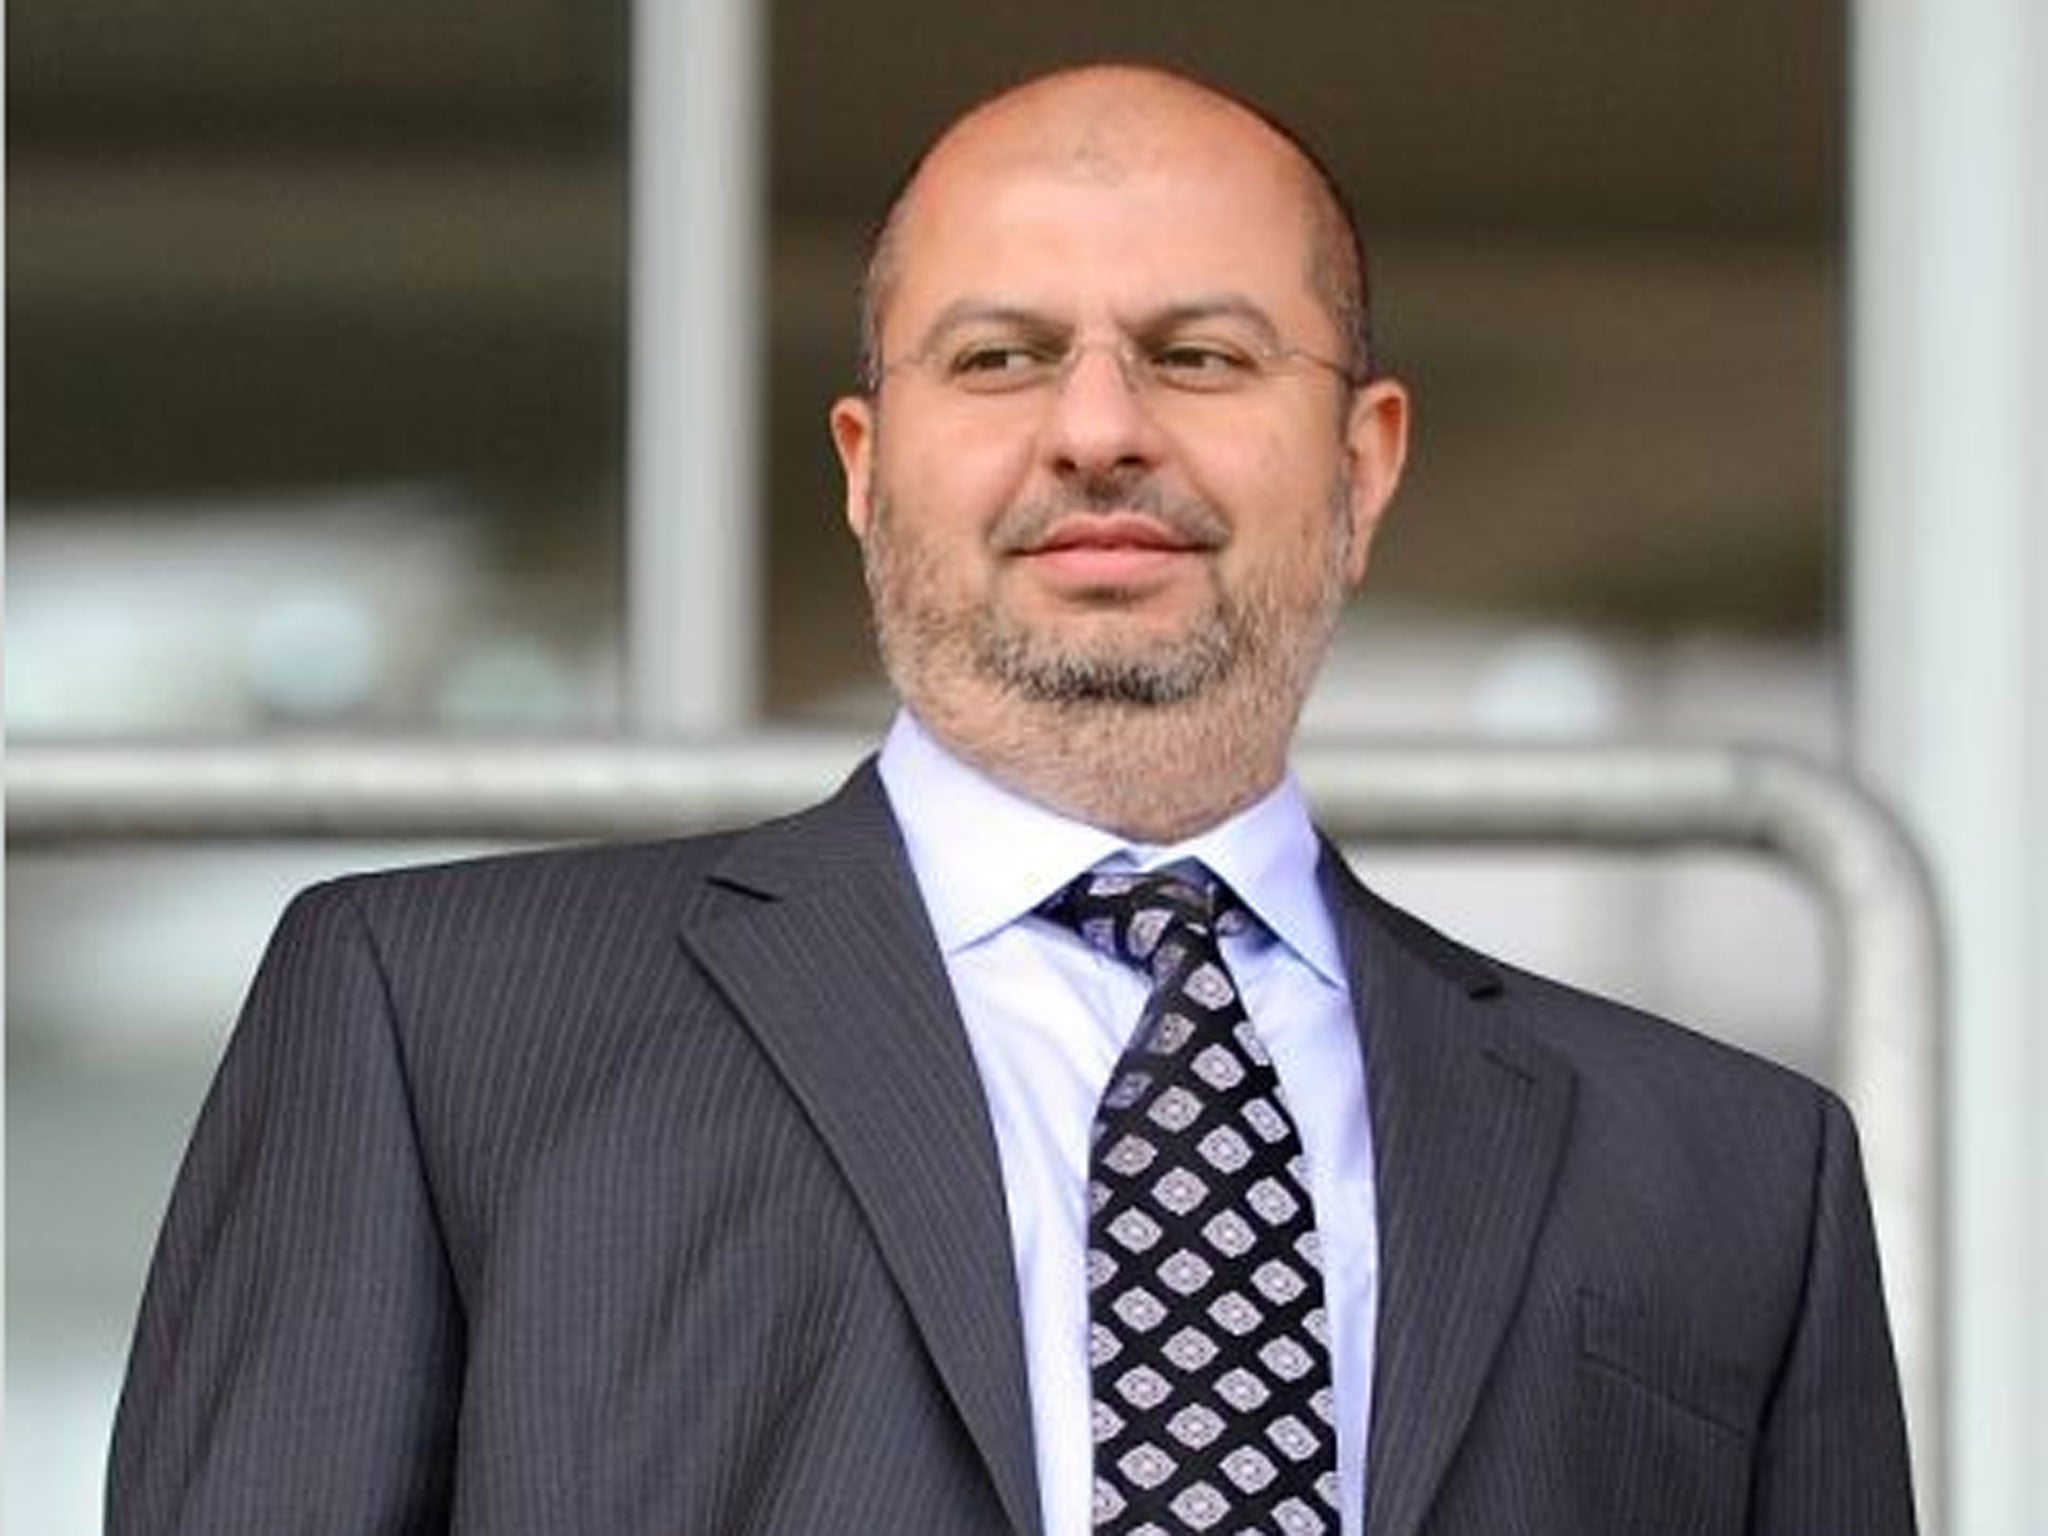 The new co-owner of Sheffield United is the first member of Saudi Arabian royalty to invest in English football